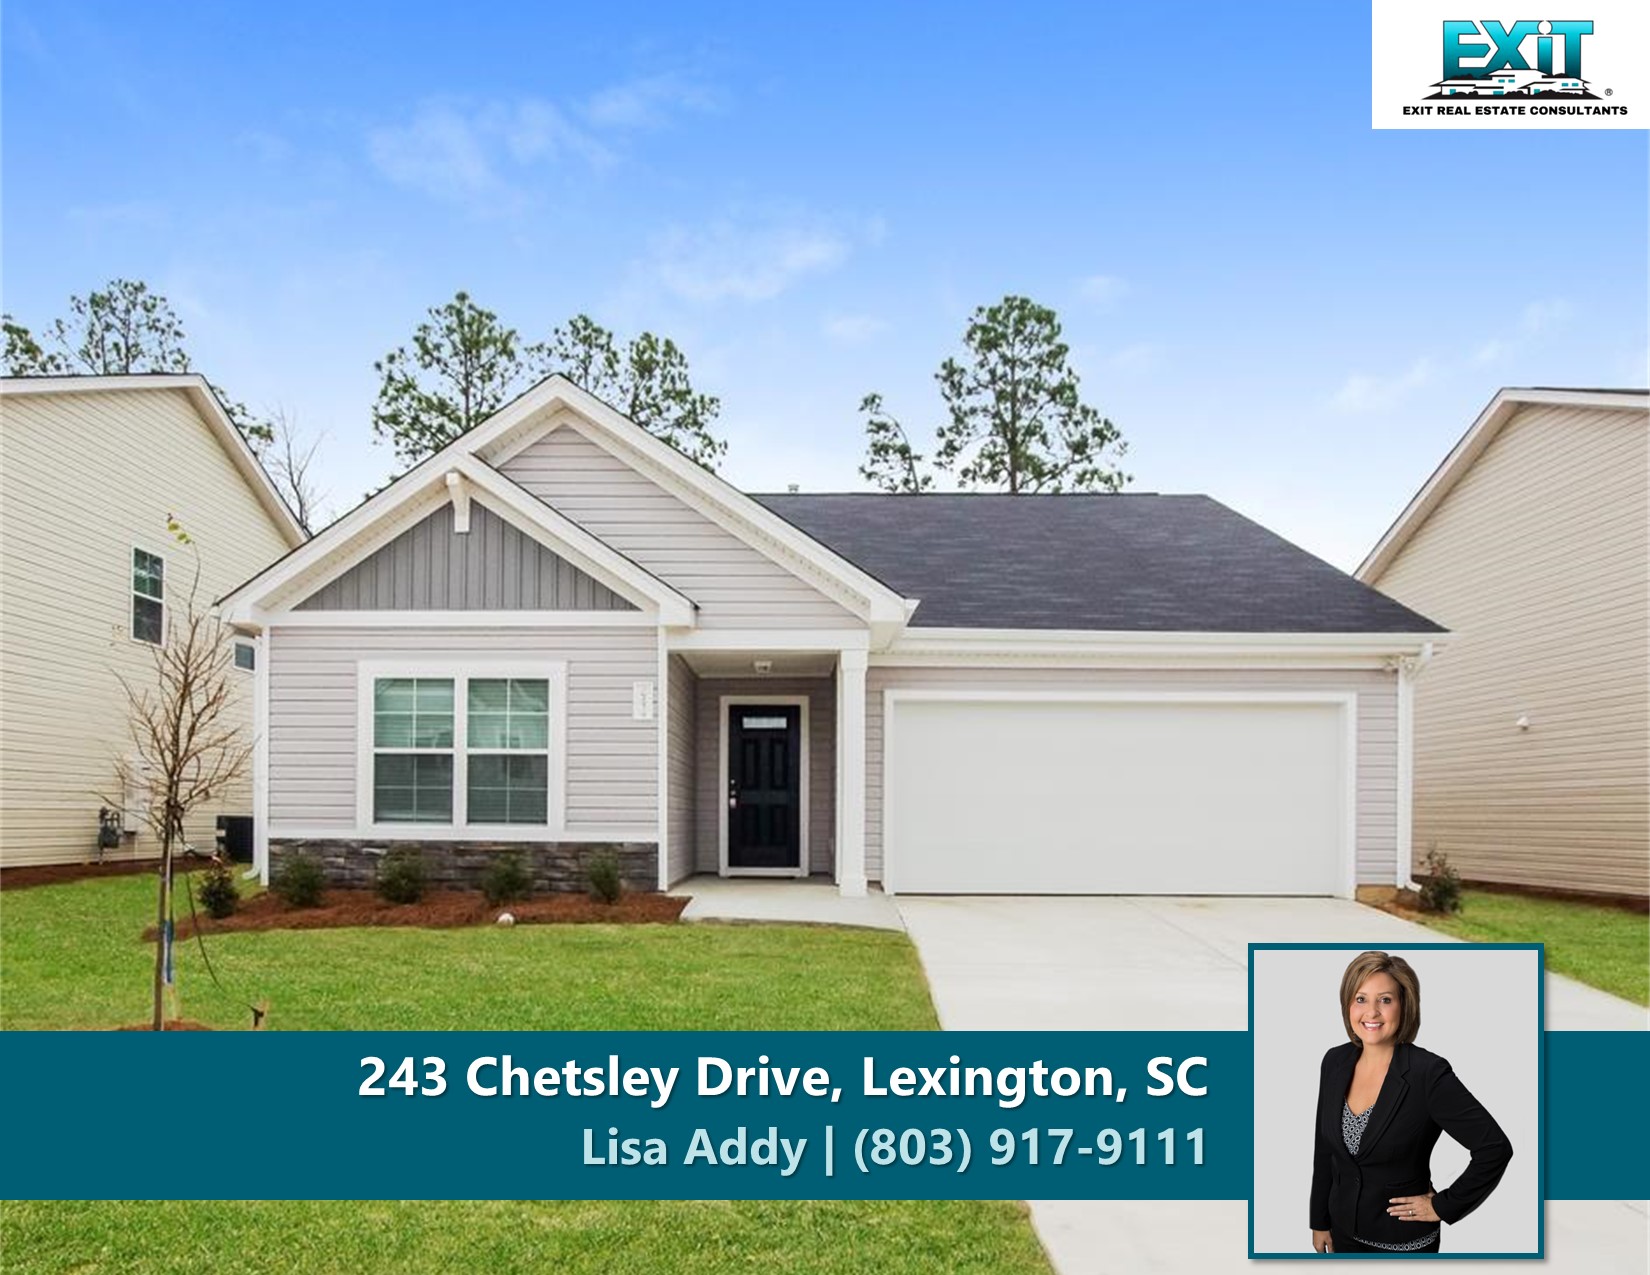 Just listed in Cannon Springs - Lexington